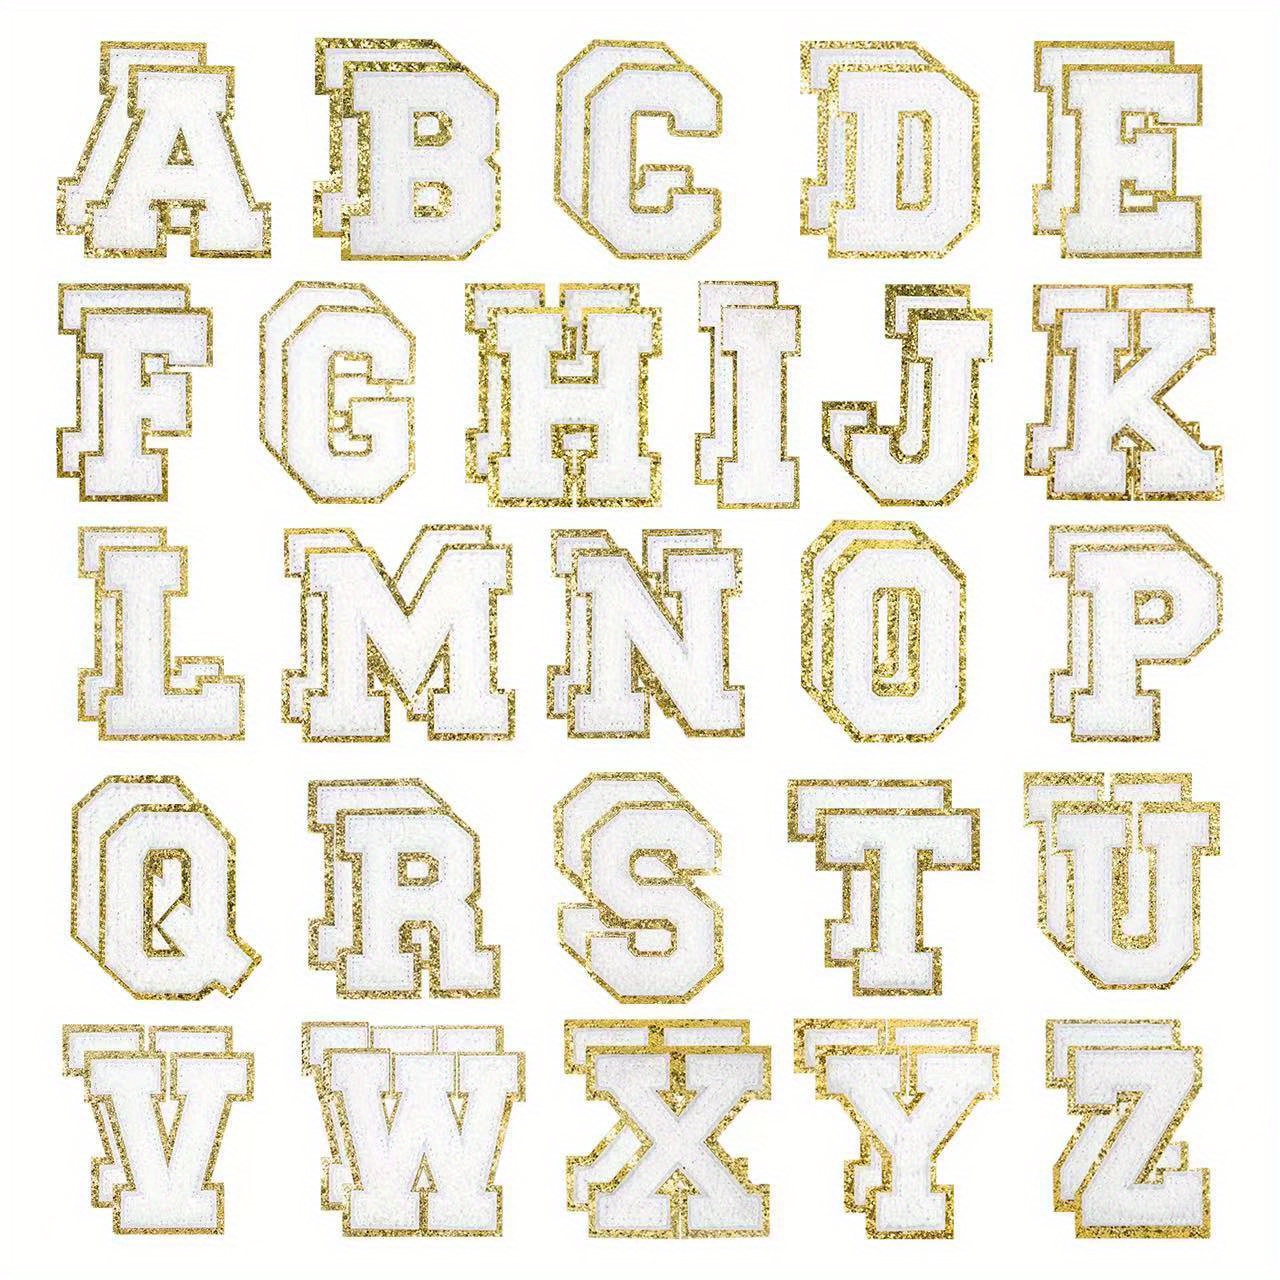 Self-Adhesive Iron on Letters Chenille Patches: 26PCS White Letter Patches  Stickers Varsity Letter Patches for Clothing Jackets Backpacks Hats Repair  Alphabet Embroidered Applique Preppy Patch 26pcs White Letter Chenille  Patches